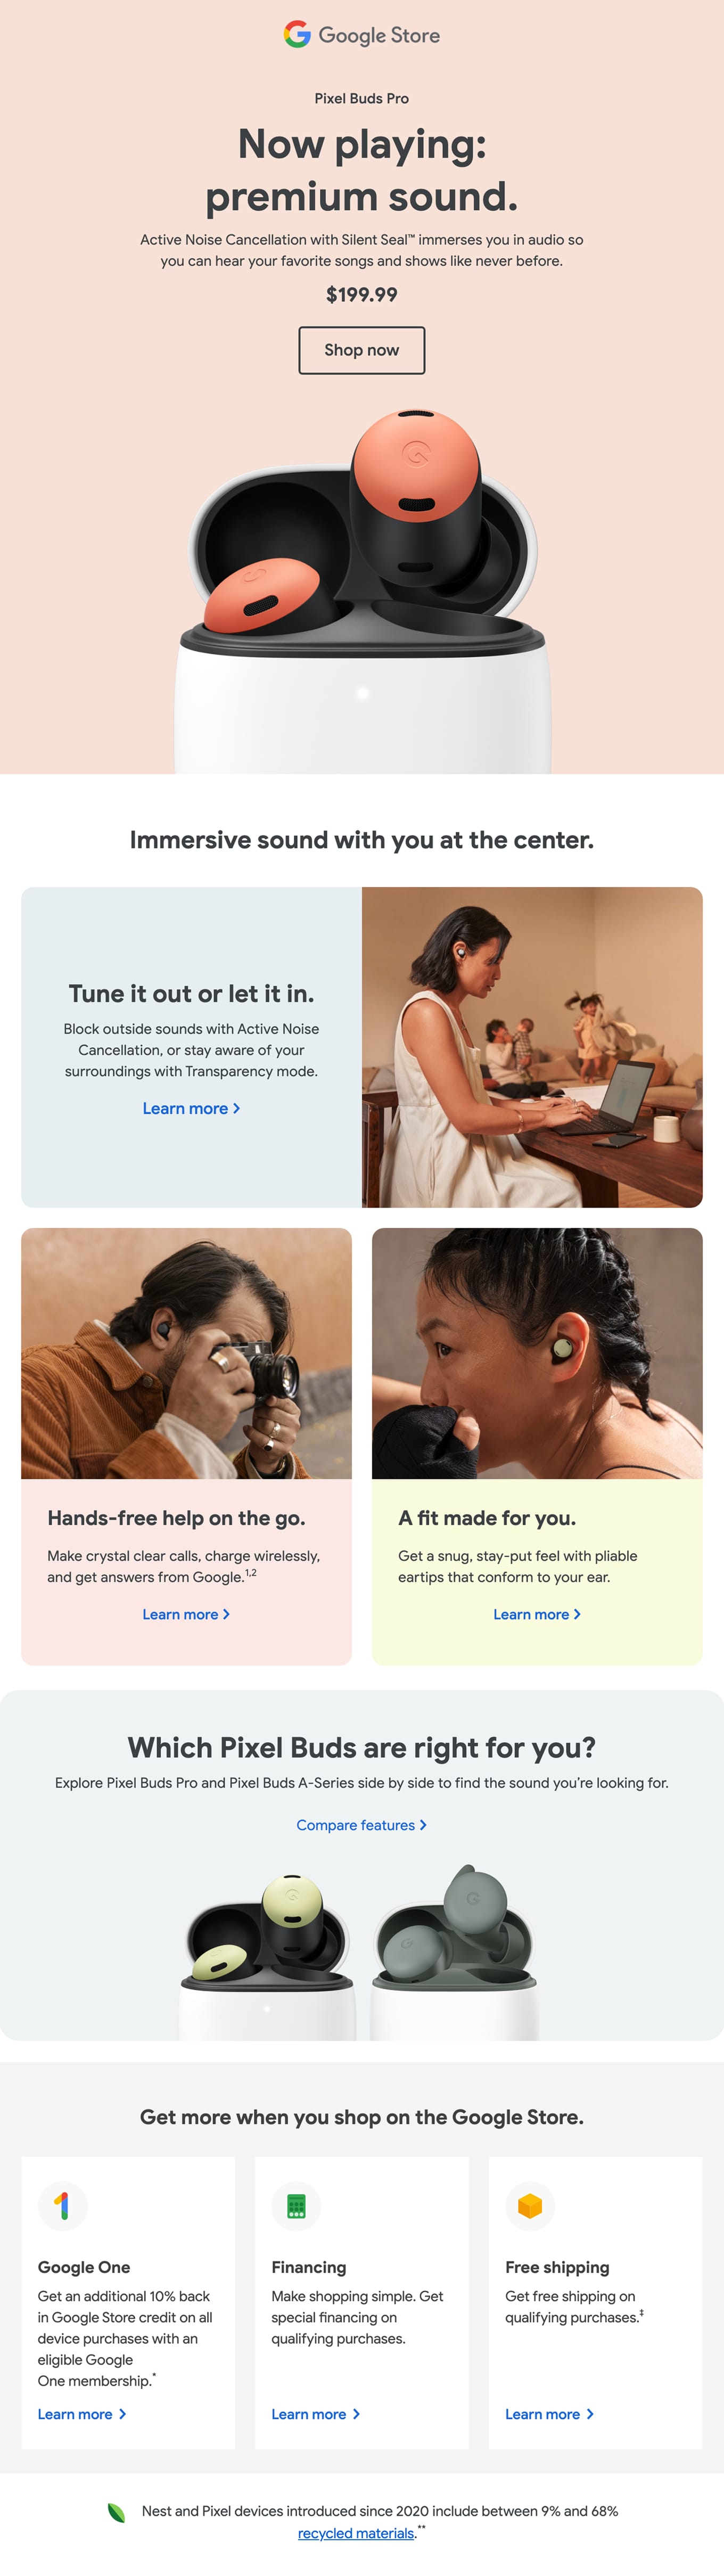 Press play on the new Pixel Buds Pro Email Screenshot